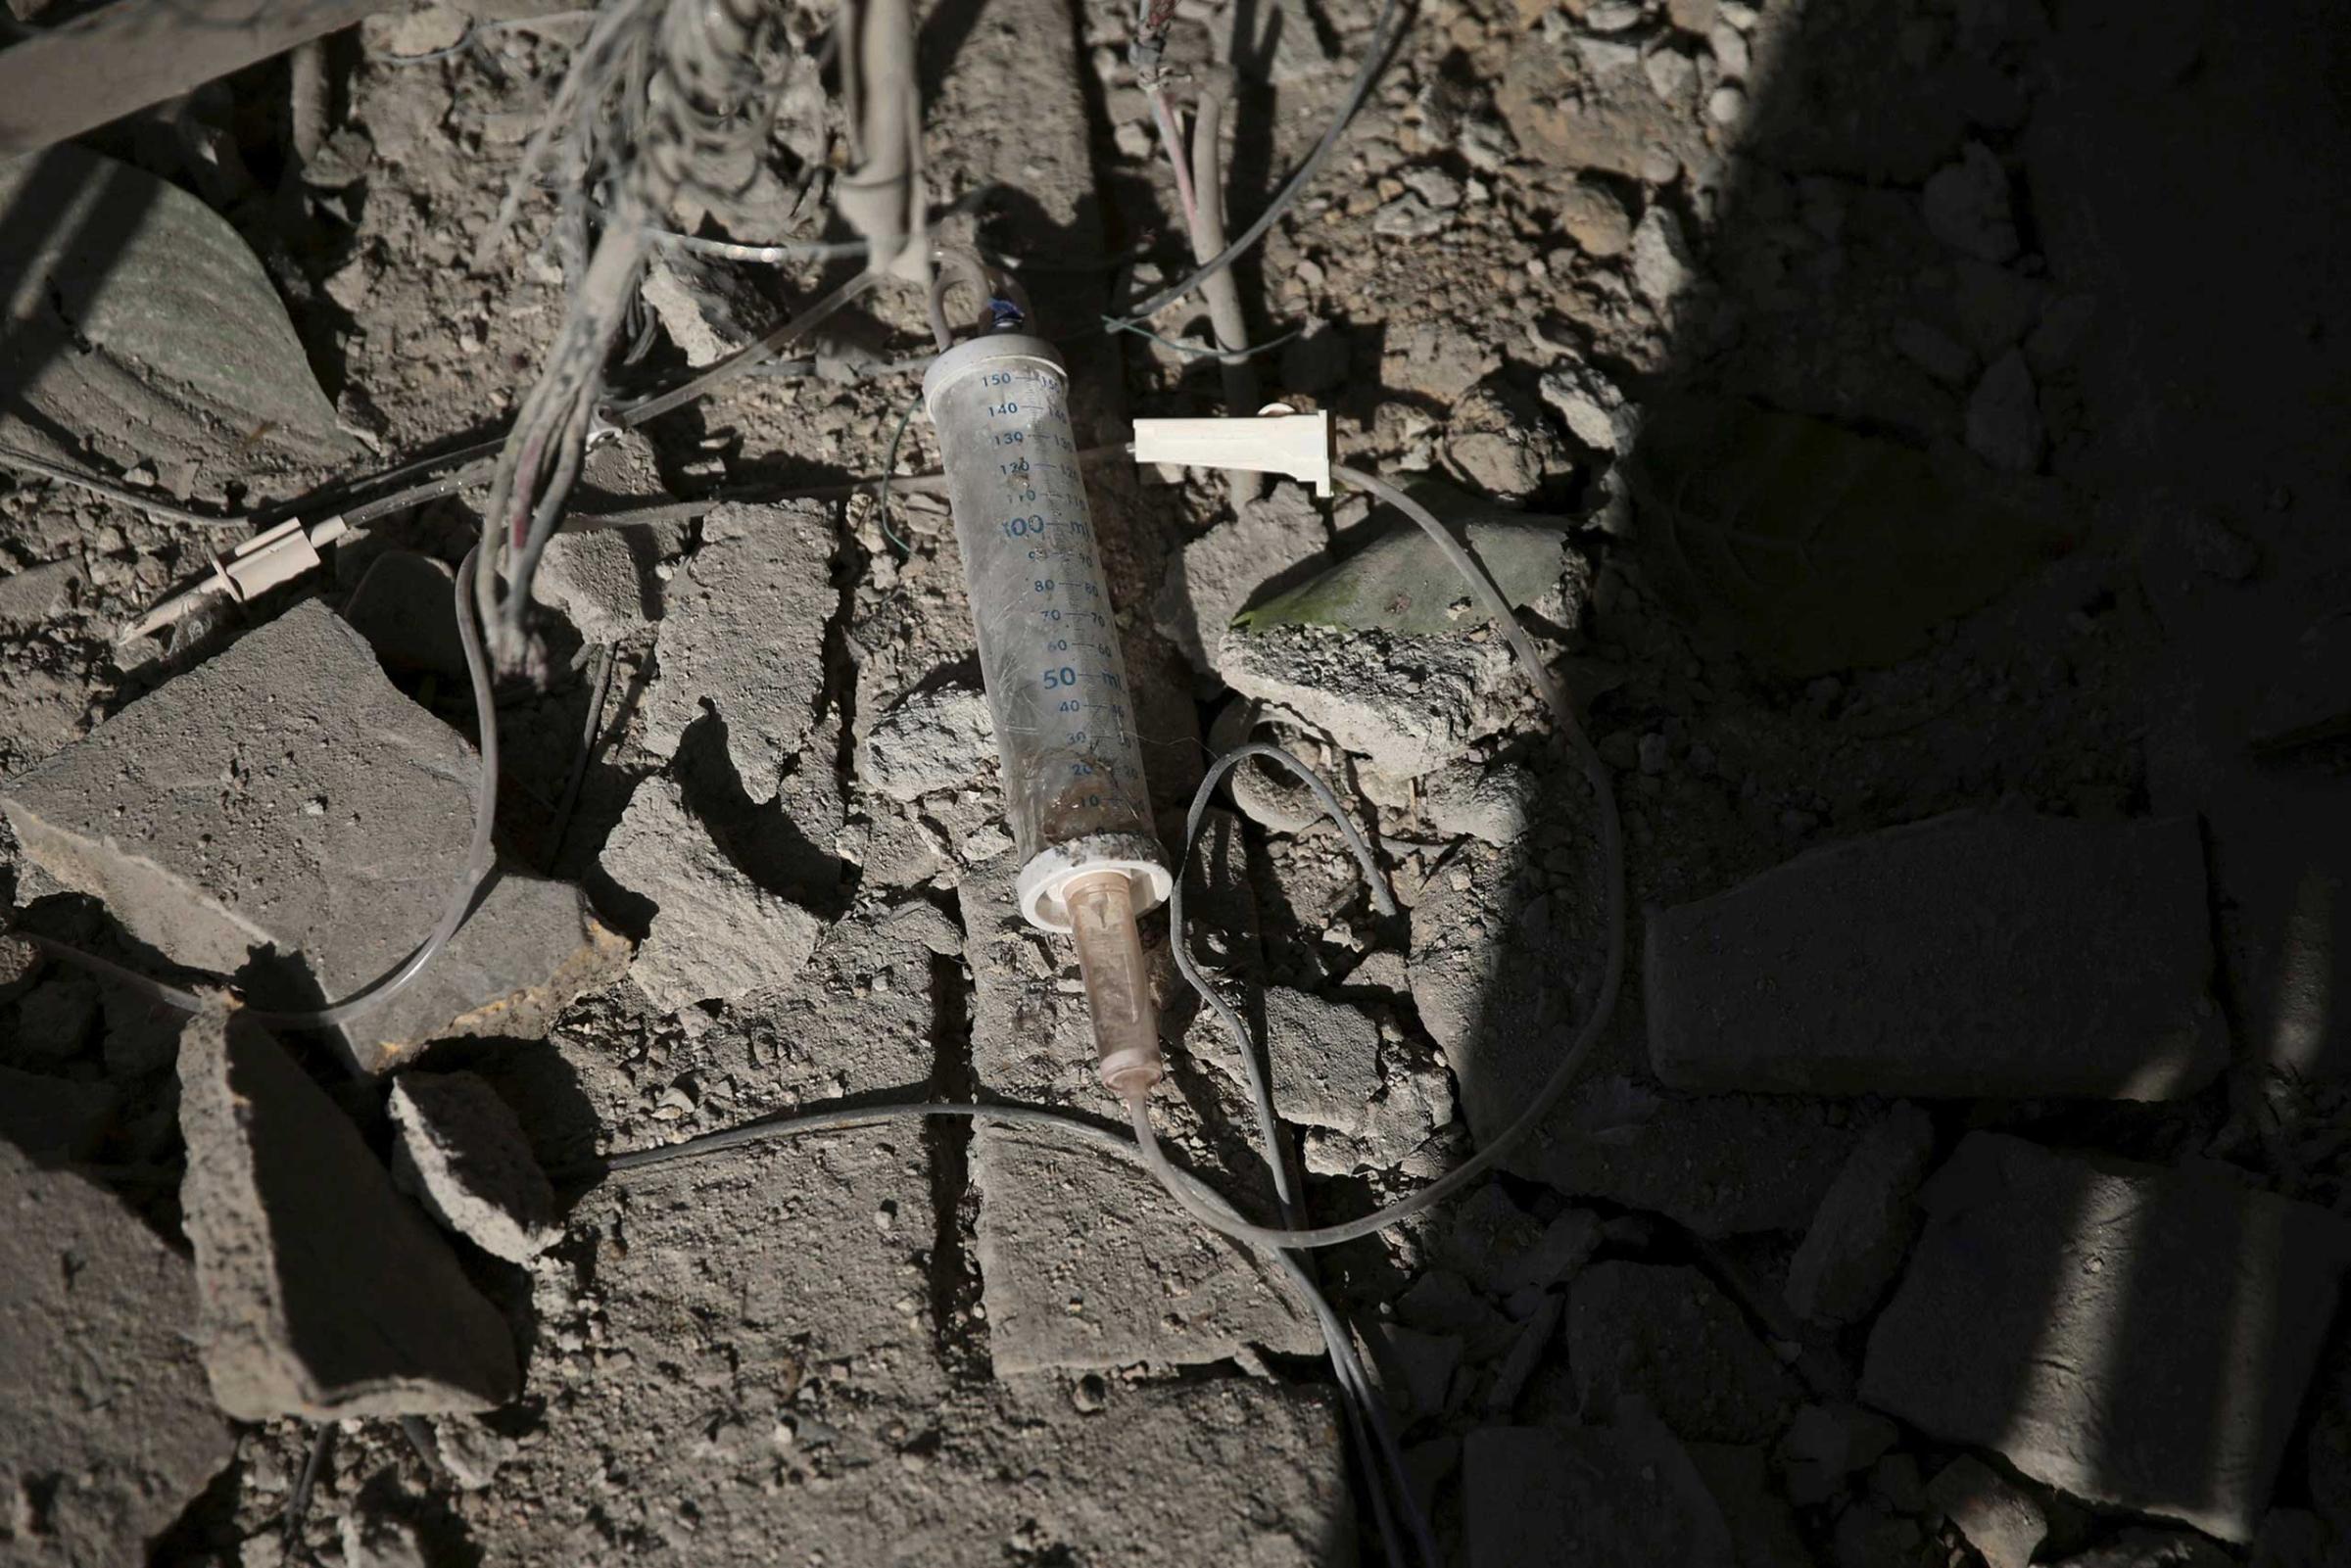 A damaged Intravenous apparatus is pictured outside a damaged newborn nursery after what activists said were air and missile strikes in the Douma neighborhood of Damascus, Syria December 13, 2015.